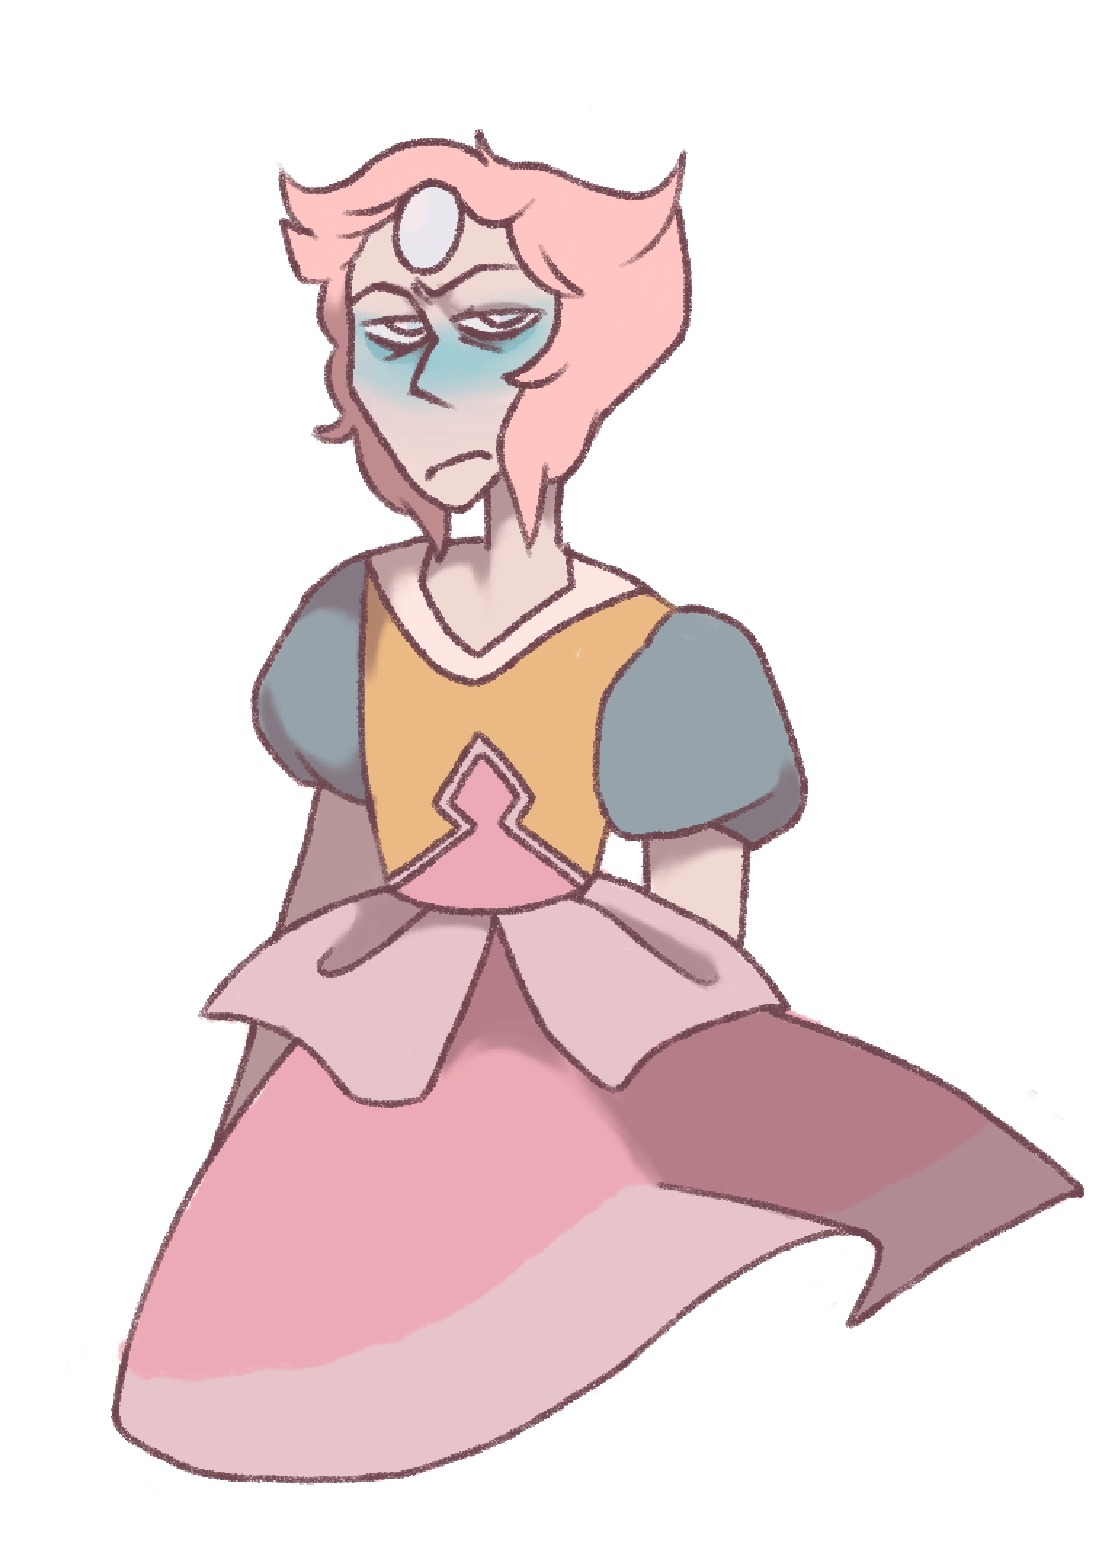 i honestly hate the leaked past pearl dress with all my being but I love pearl so ://////